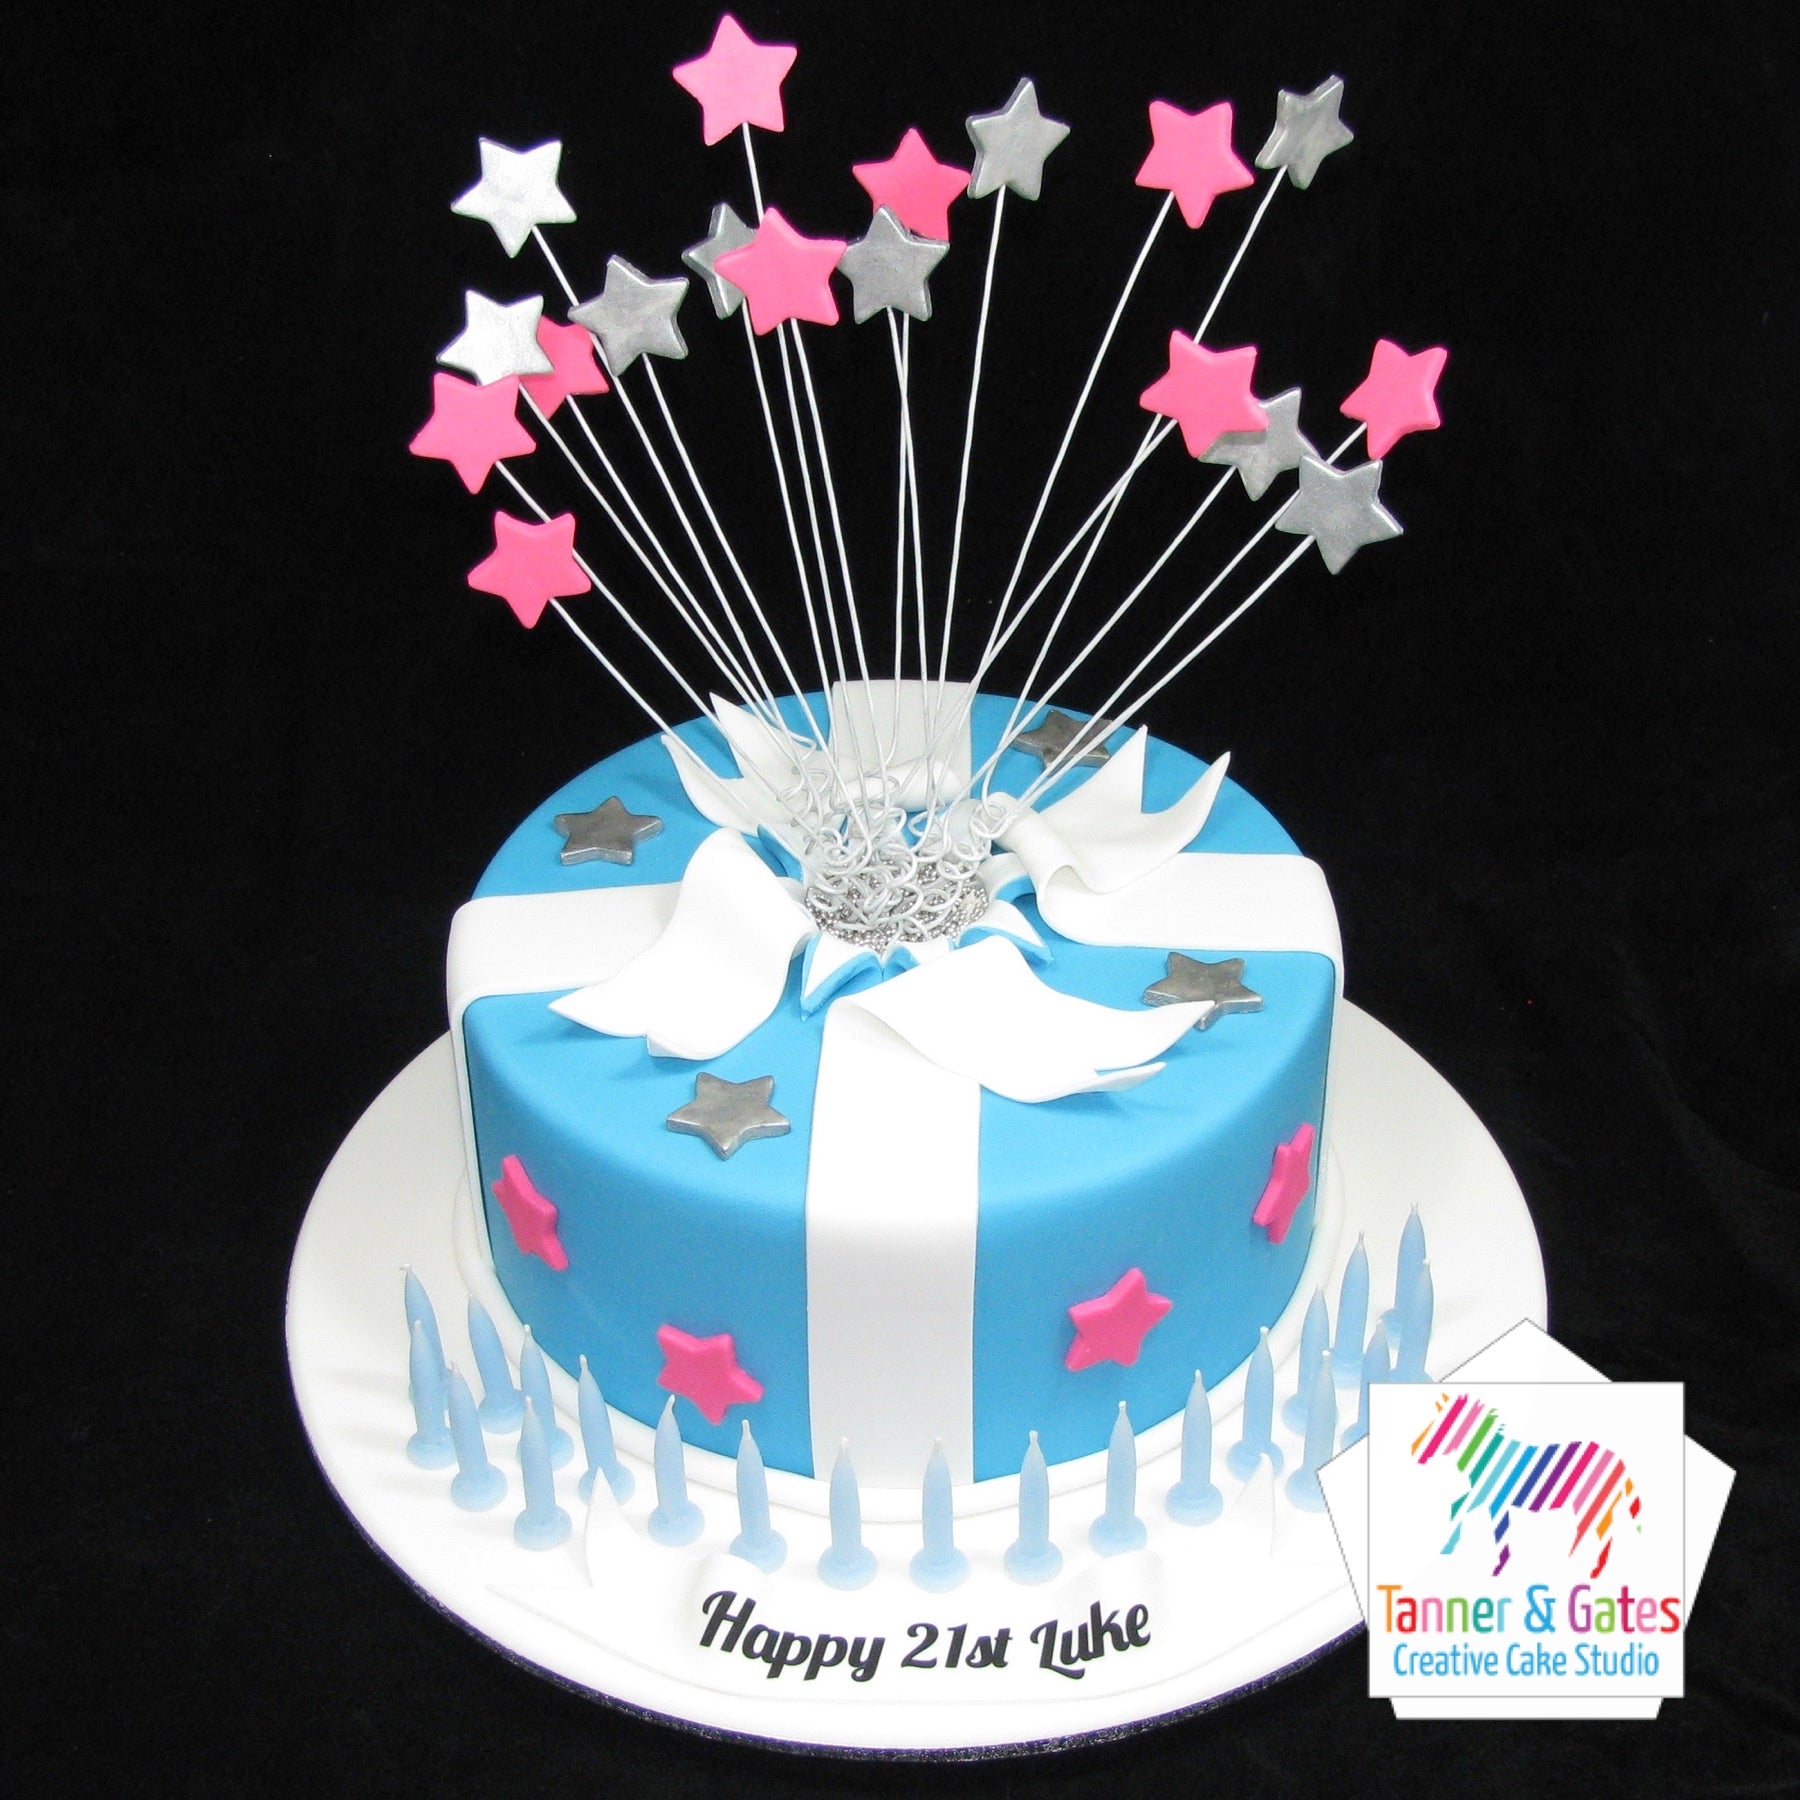 Amazon.com: One Cake Topper - Rainbow Glitter Litter Star First Birthday  Cake Decor -One Year Old Birthday Party Decorations : Grocery & Gourmet Food